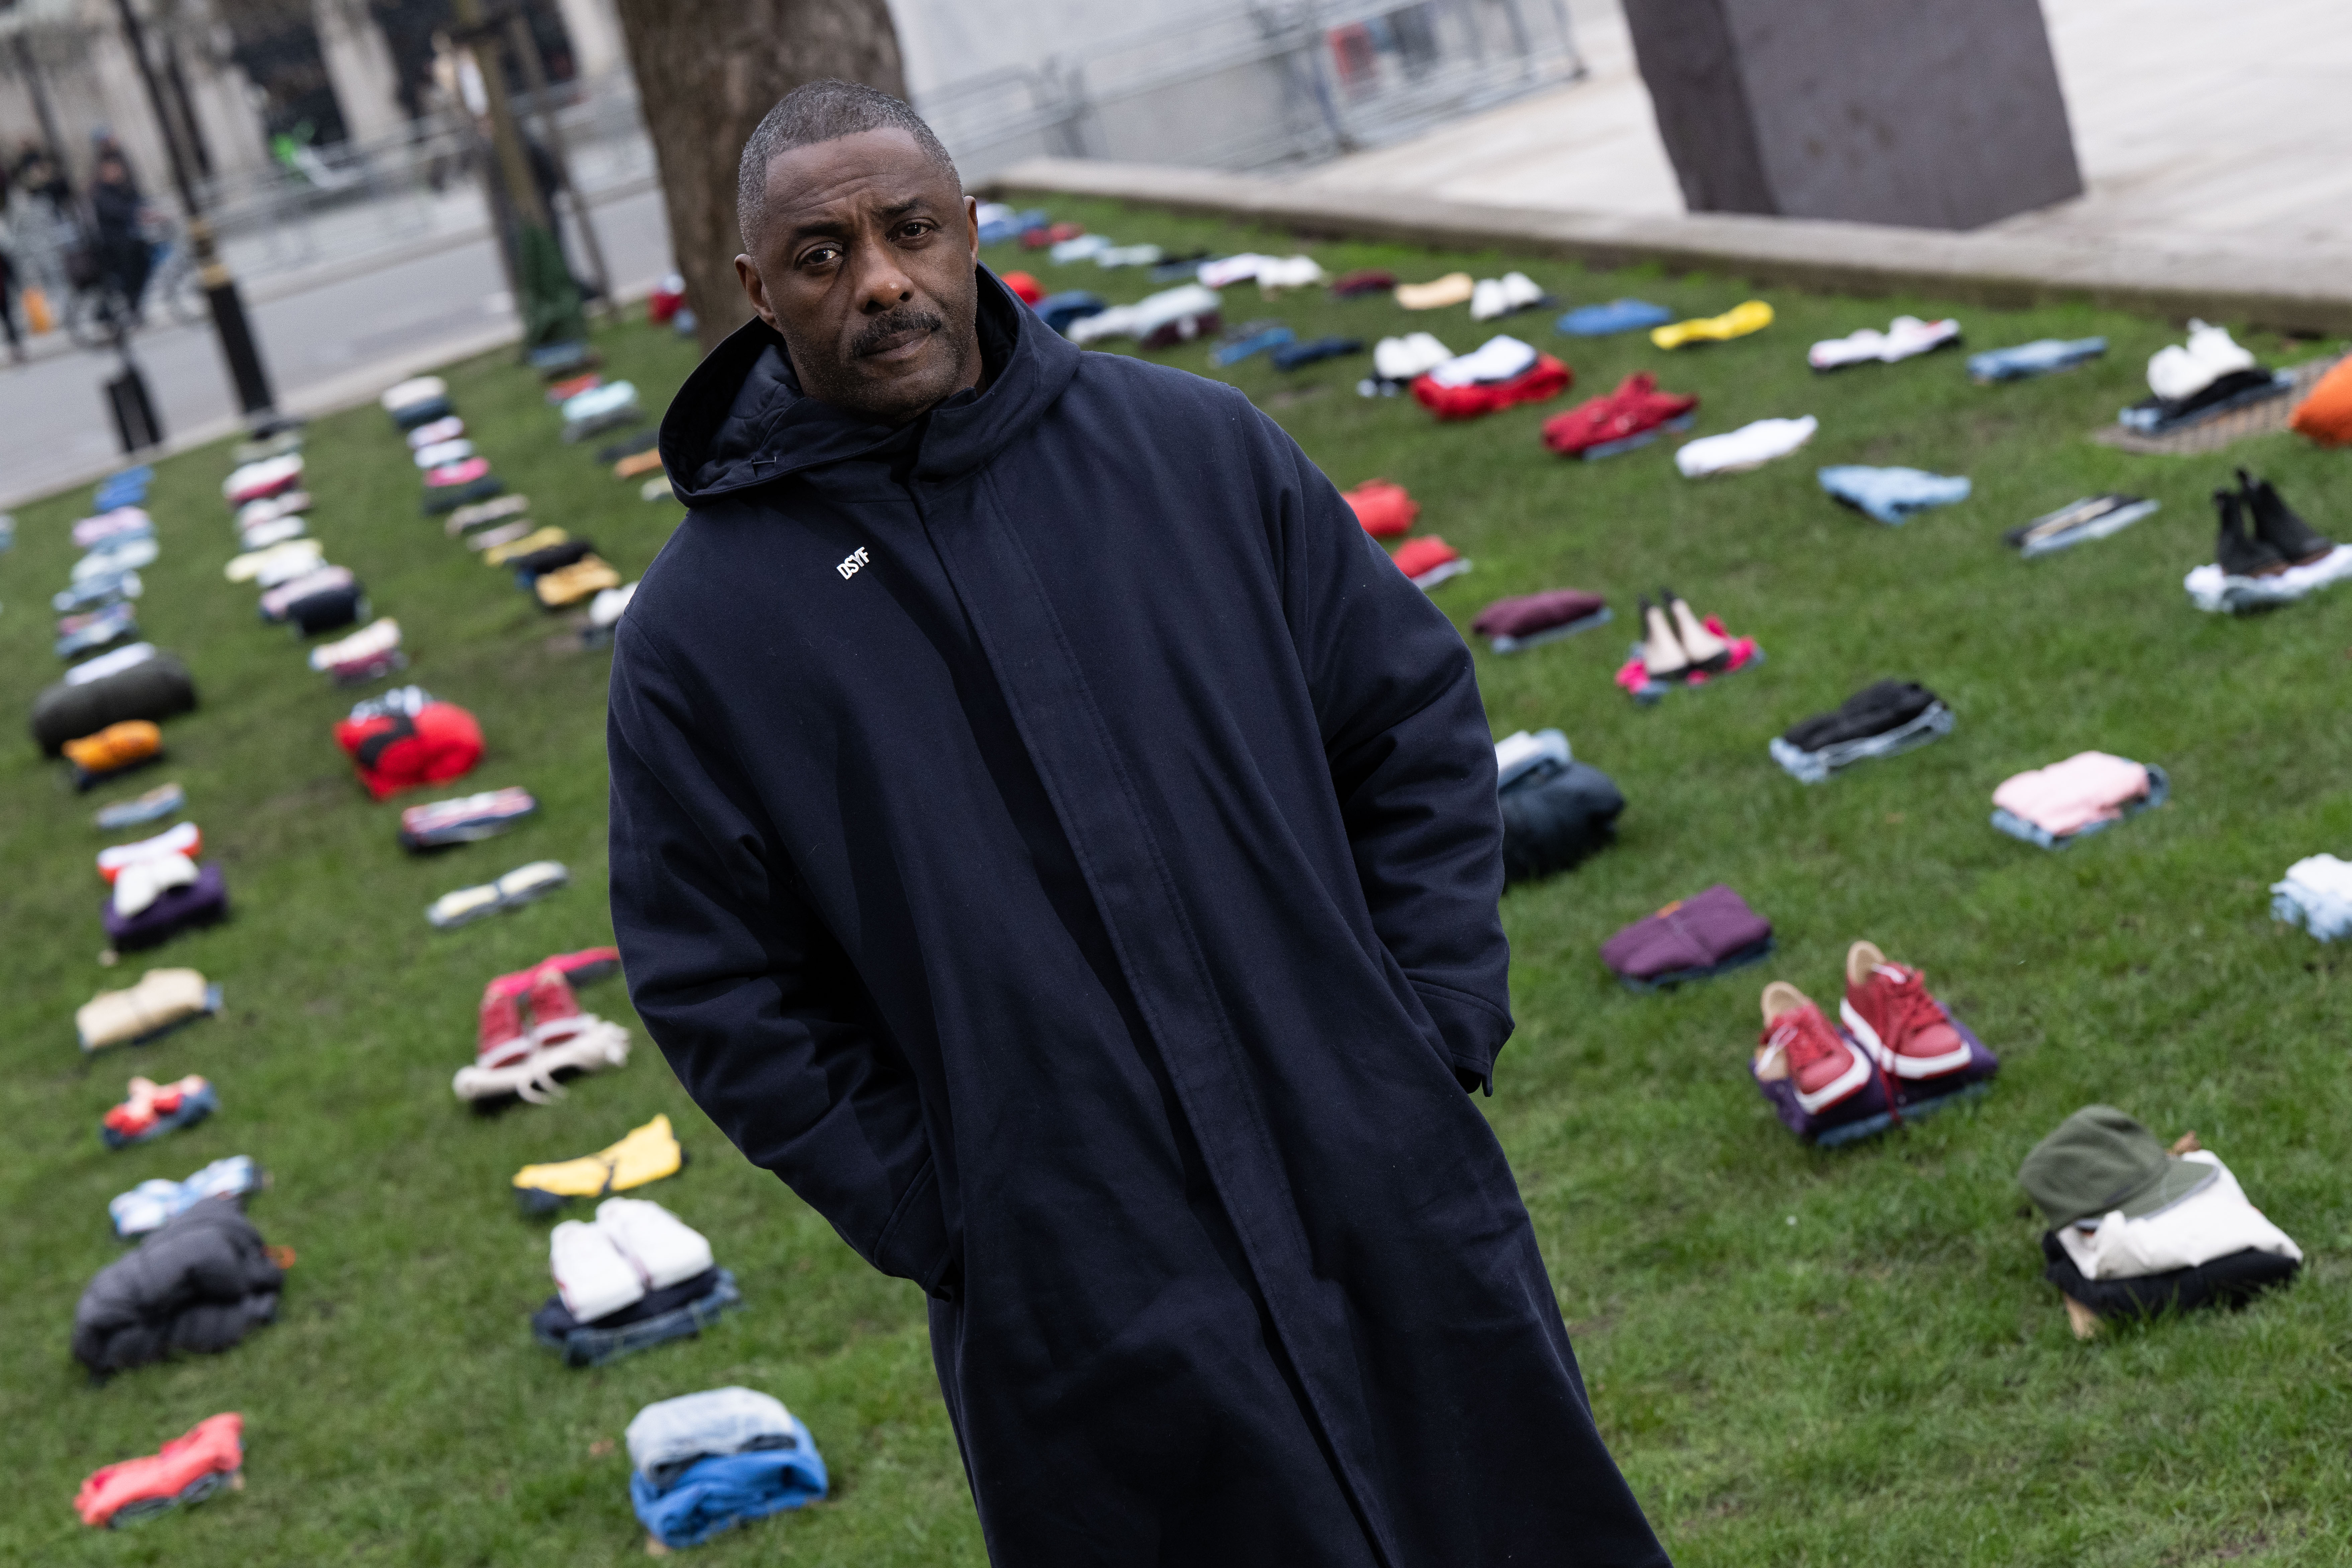 Idris Elba stood in front of an installation of over 200 bundles of clothing representing the lives lost to knife crime in the UK earlier this month